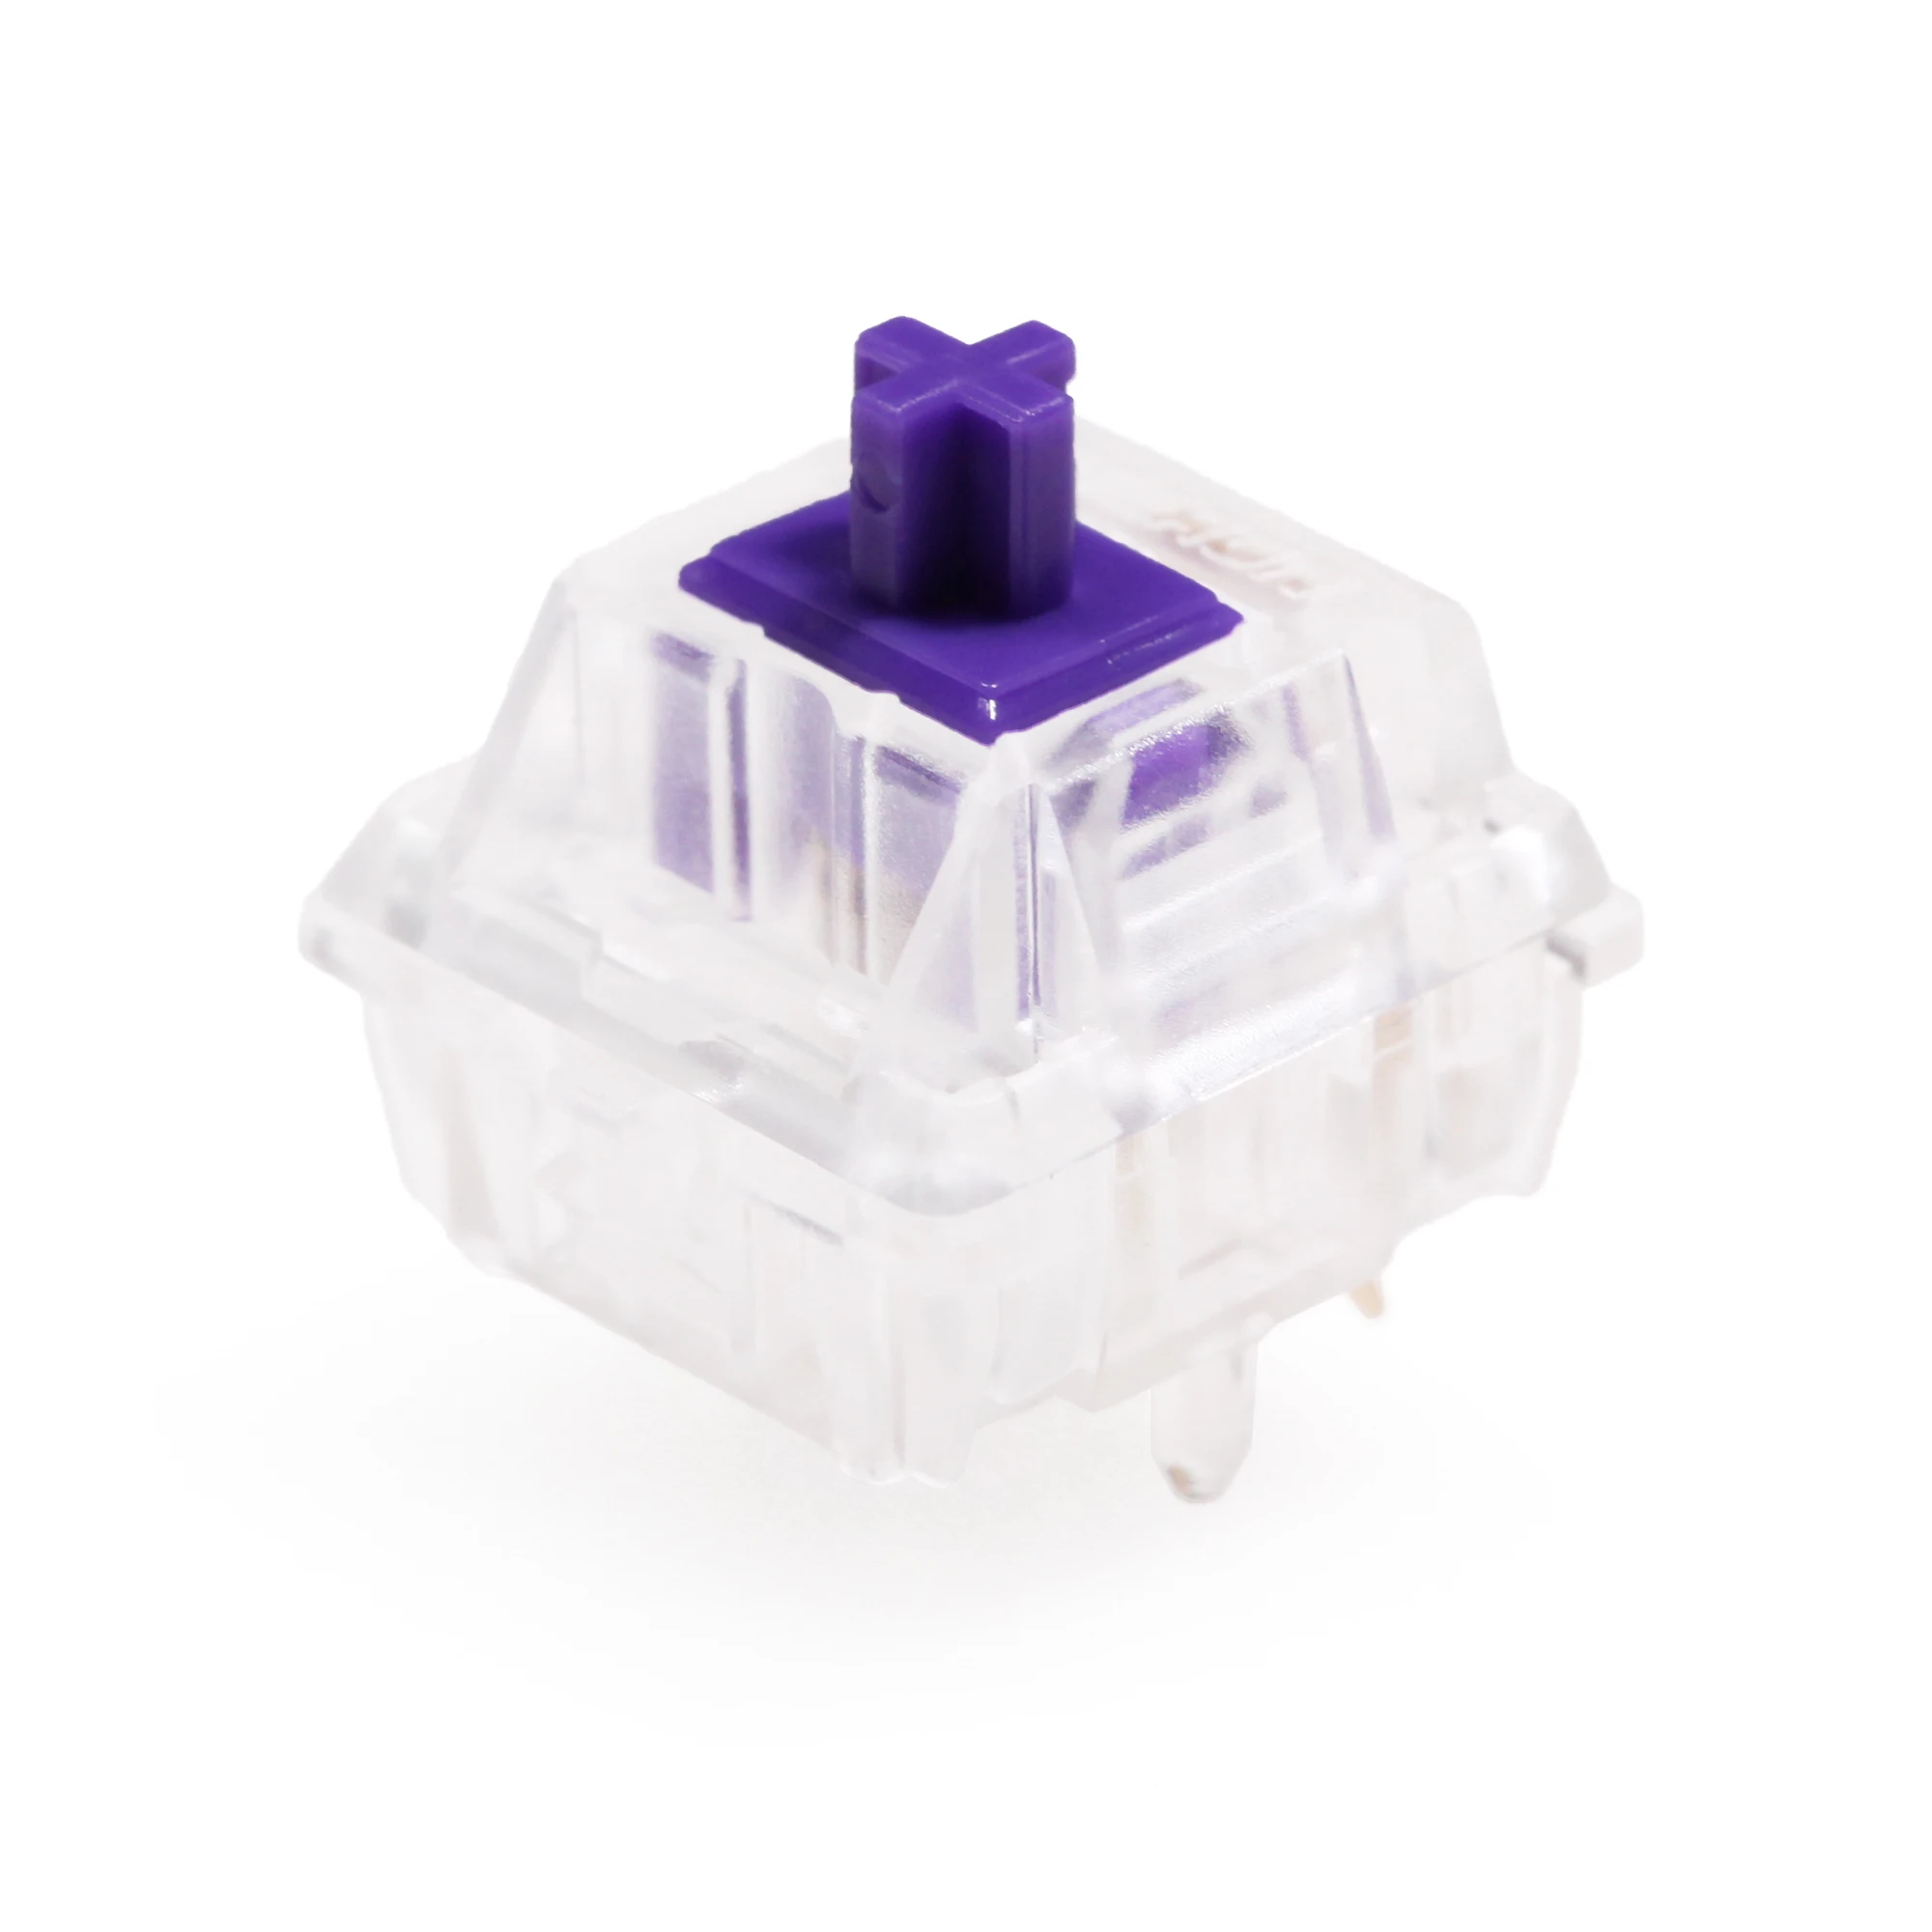 cute keyboards for computers Gateron Zealio V2 Switch Tactile 62g 65g 67g 78g 5pin SMD RGB mx stem switch for mechanical keyboard Purple Colorway cute keyboards for computers